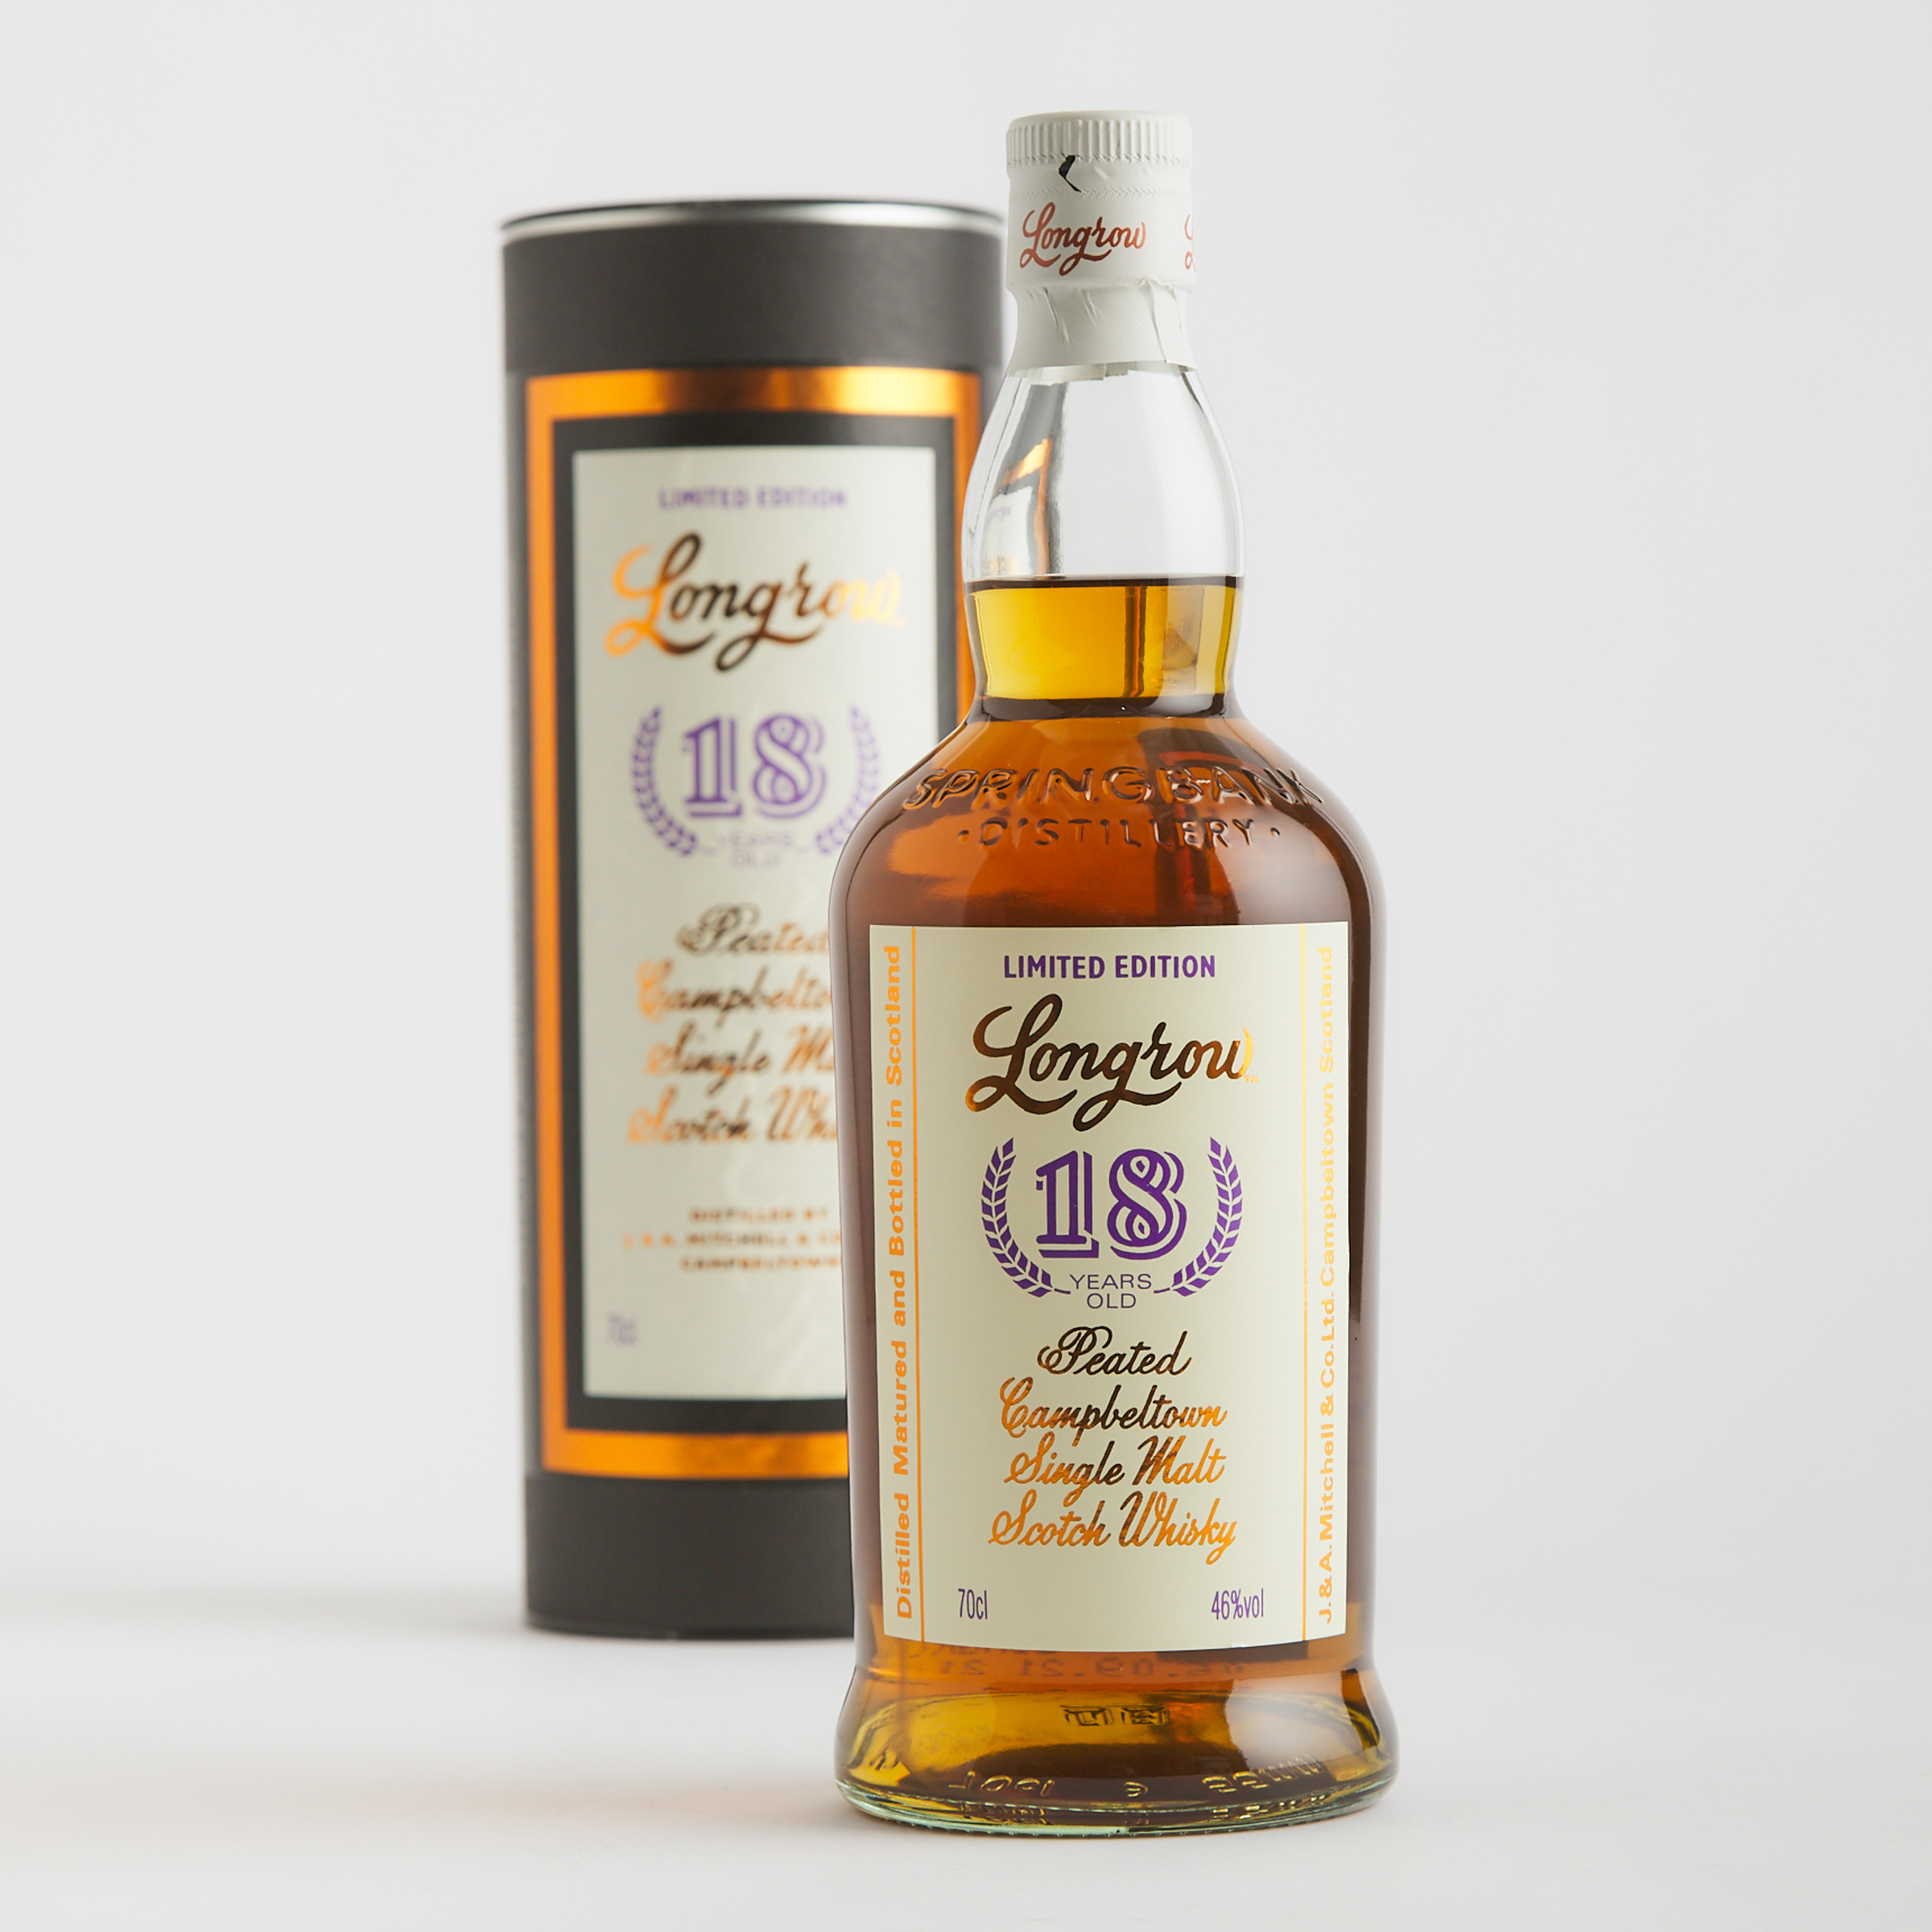 LONGROW PEATED CAMPBELTOWN SINGLE MALT SCOTCH WHISKY 18 YEARS (ONE 70 CL)